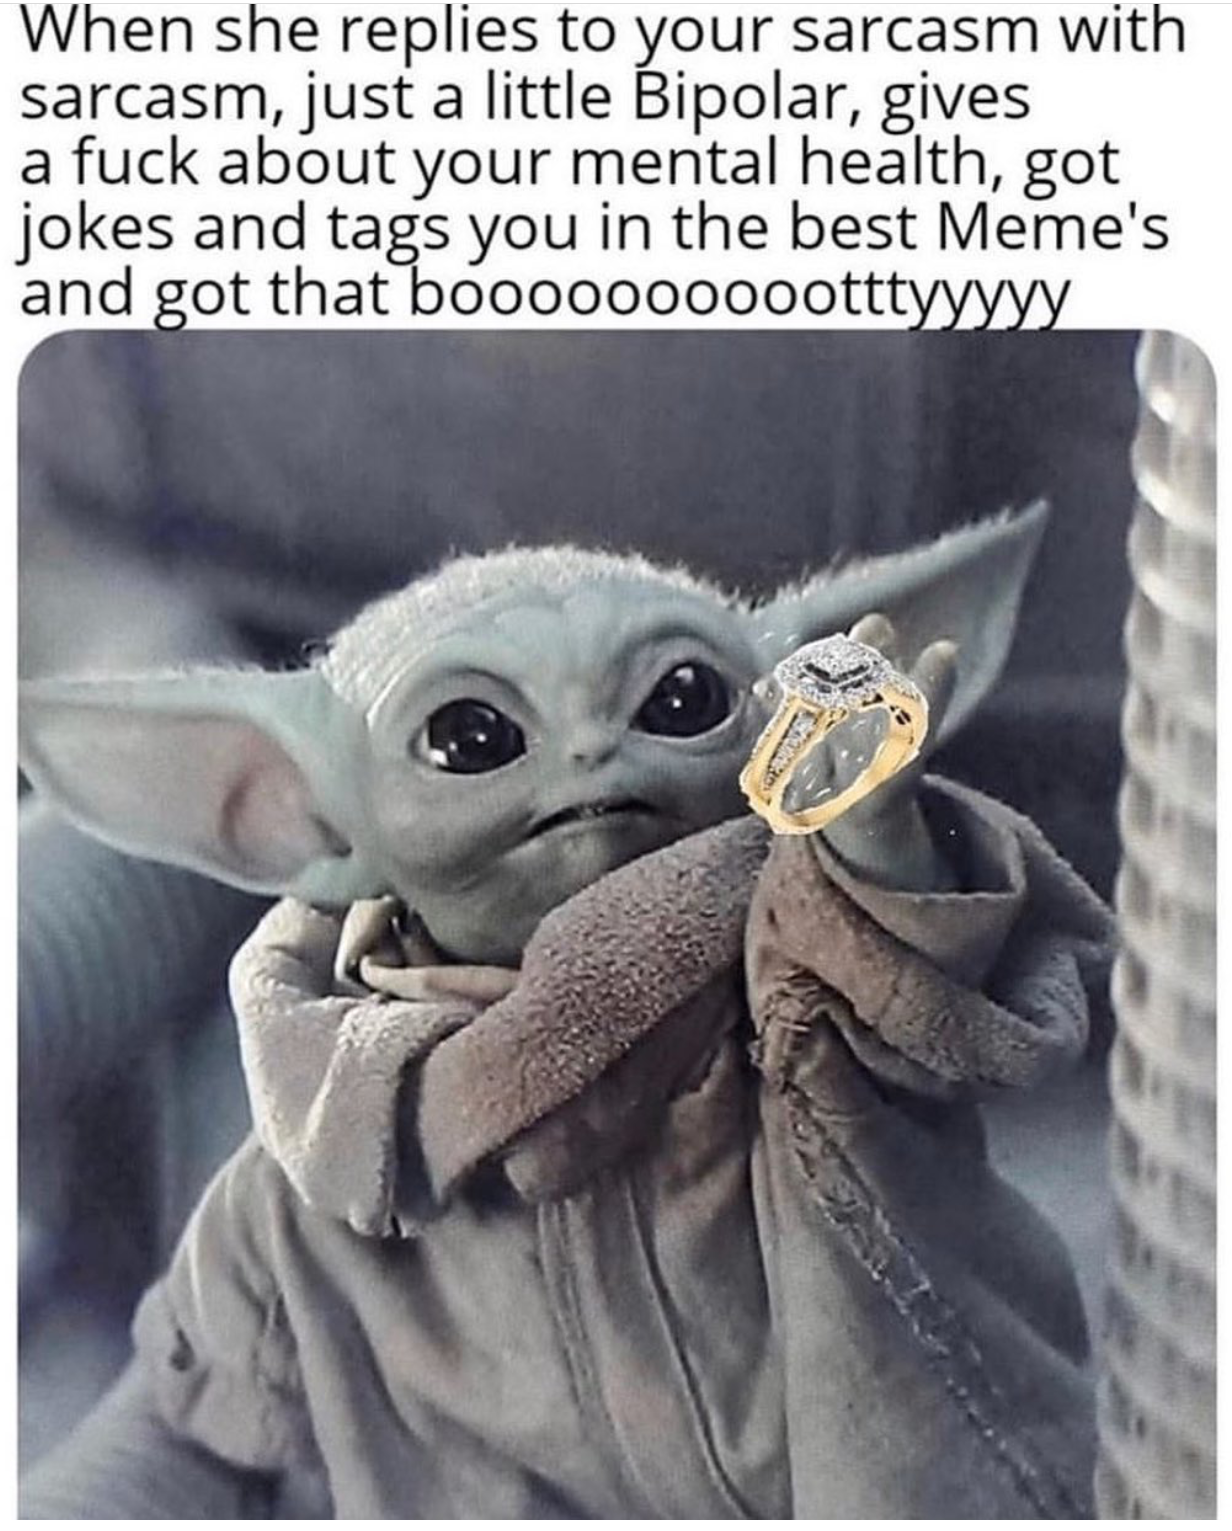 baby yoda hand - When she replies to your sarcasm with sarcasm, just a little Bipolar, gives a fuck about your mental health, got jokes and tags you in the best Meme's and got that booooooooootttyyyyy